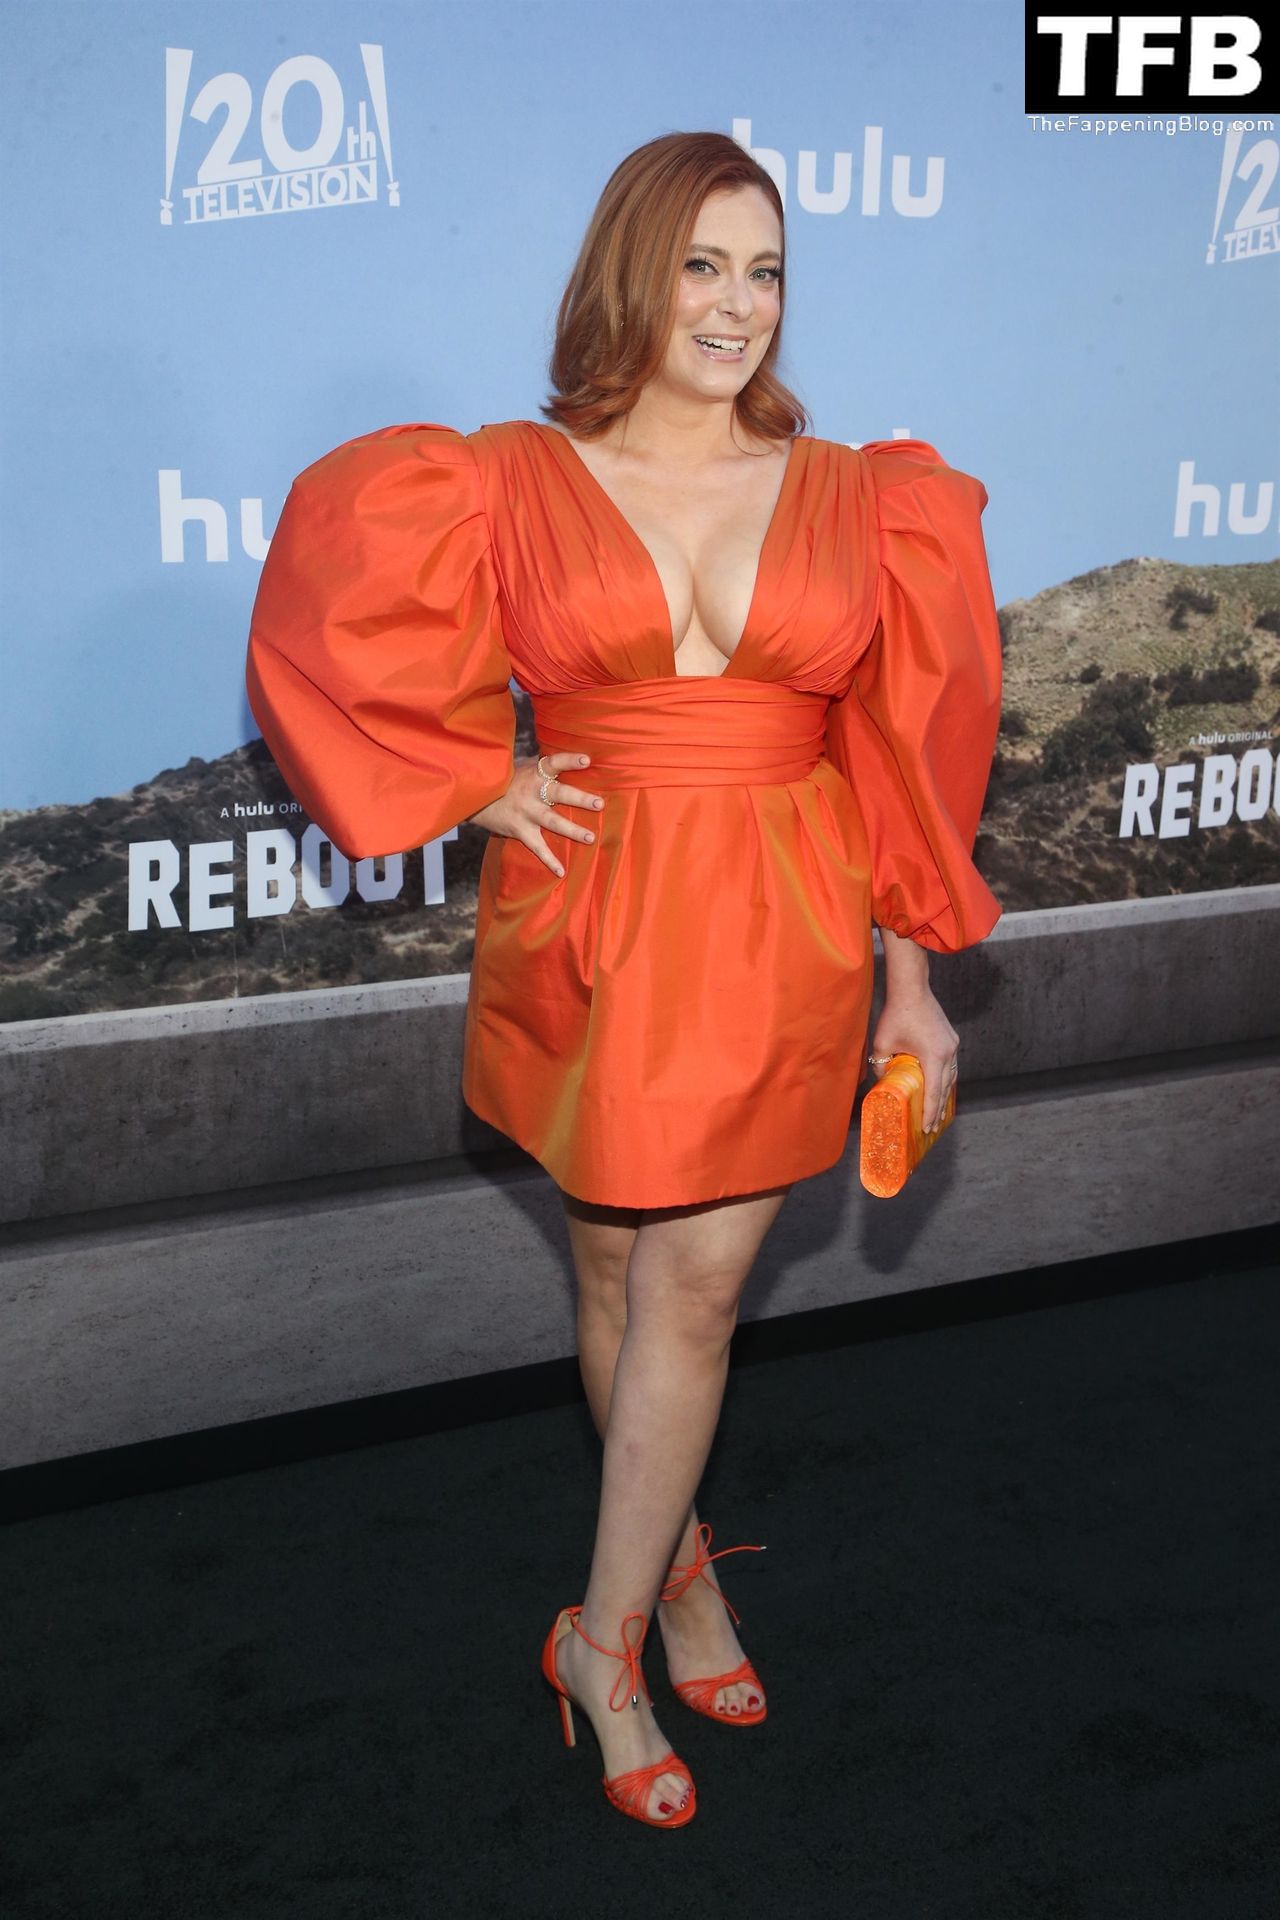 Rachel Bloom Sexy The Fappening Blog 4 - Rachel Bloom Displays Her Sexy Tits at the “Reboot” Premiere in LA (33 Photos)